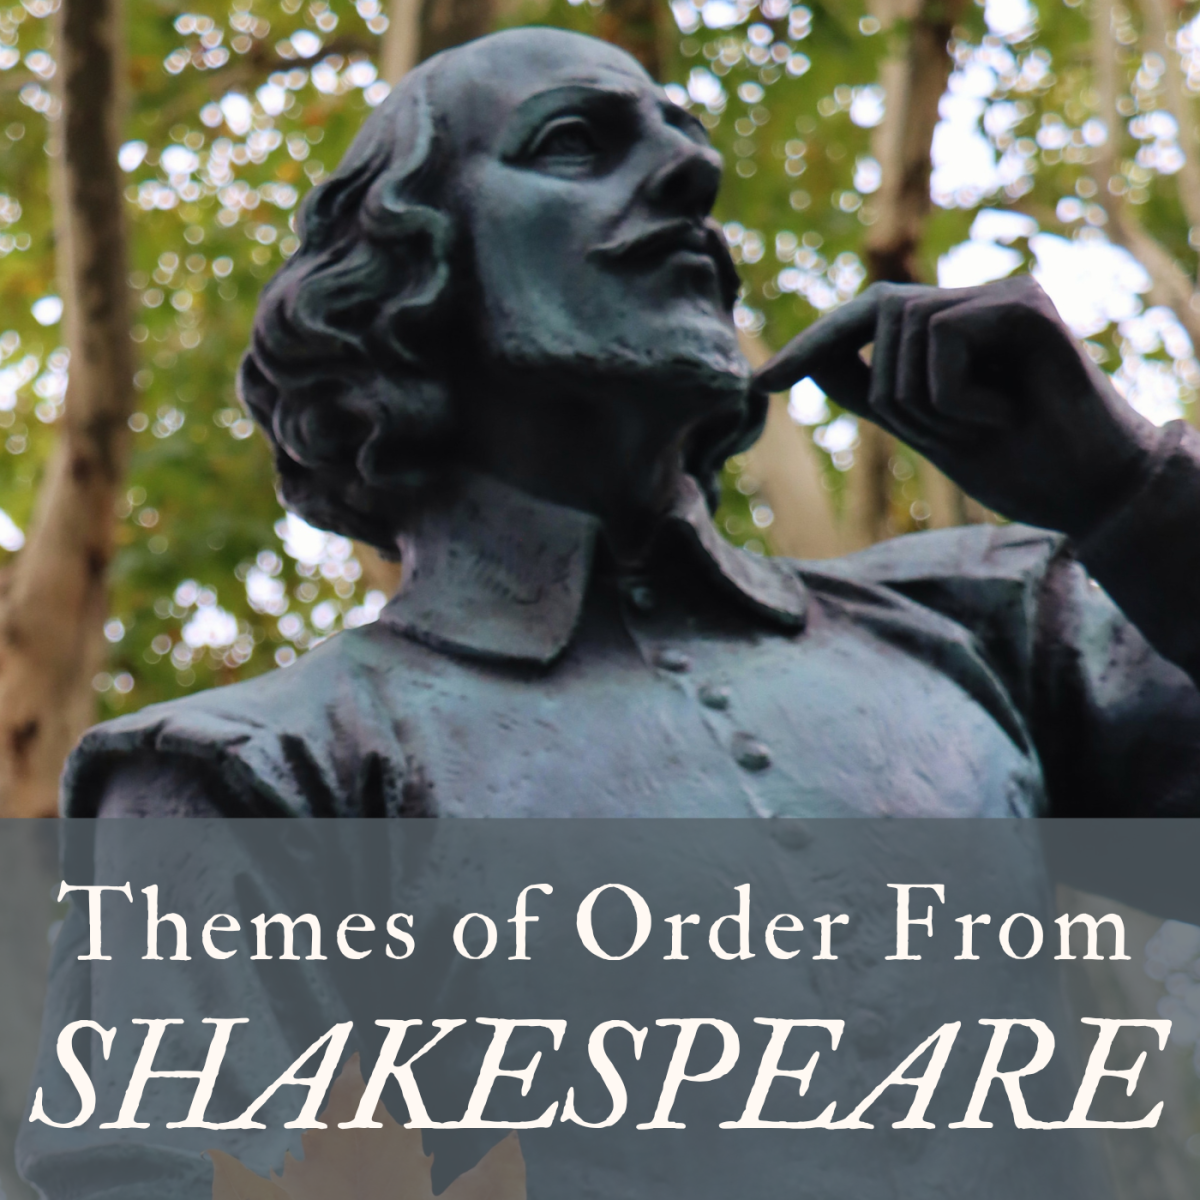 Themes of order and disorder in Shakespeare's plays